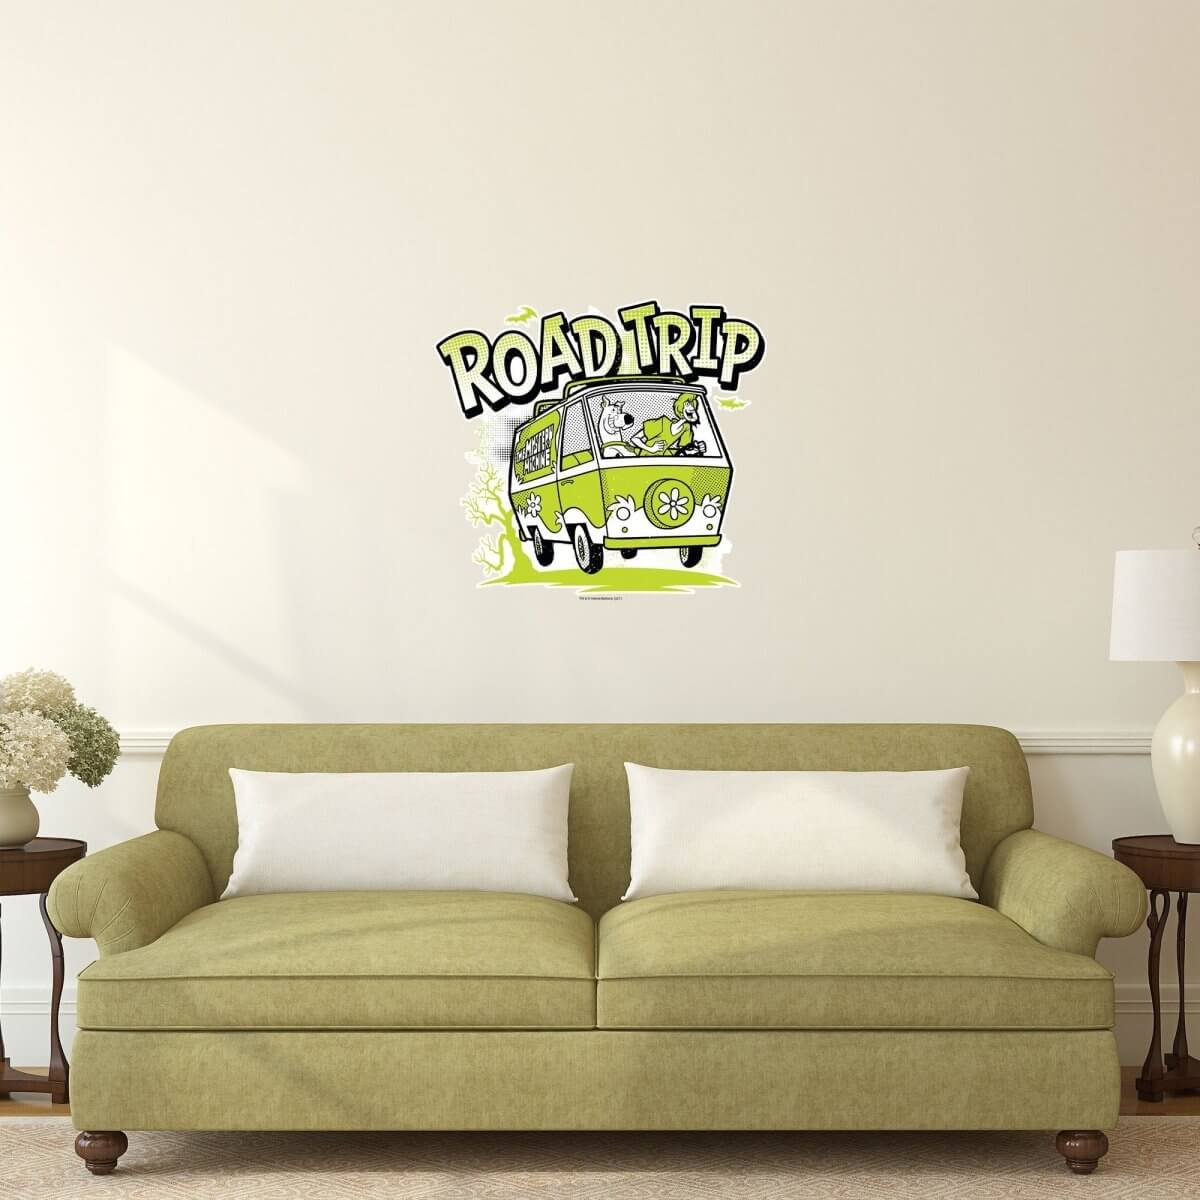 Kismet Decals Home & Room Decor Road Trip with Shaggy and Scooby-Doo Wall decal sticker - officially licensed - latex printed with no solvent odor - Kismet Decals